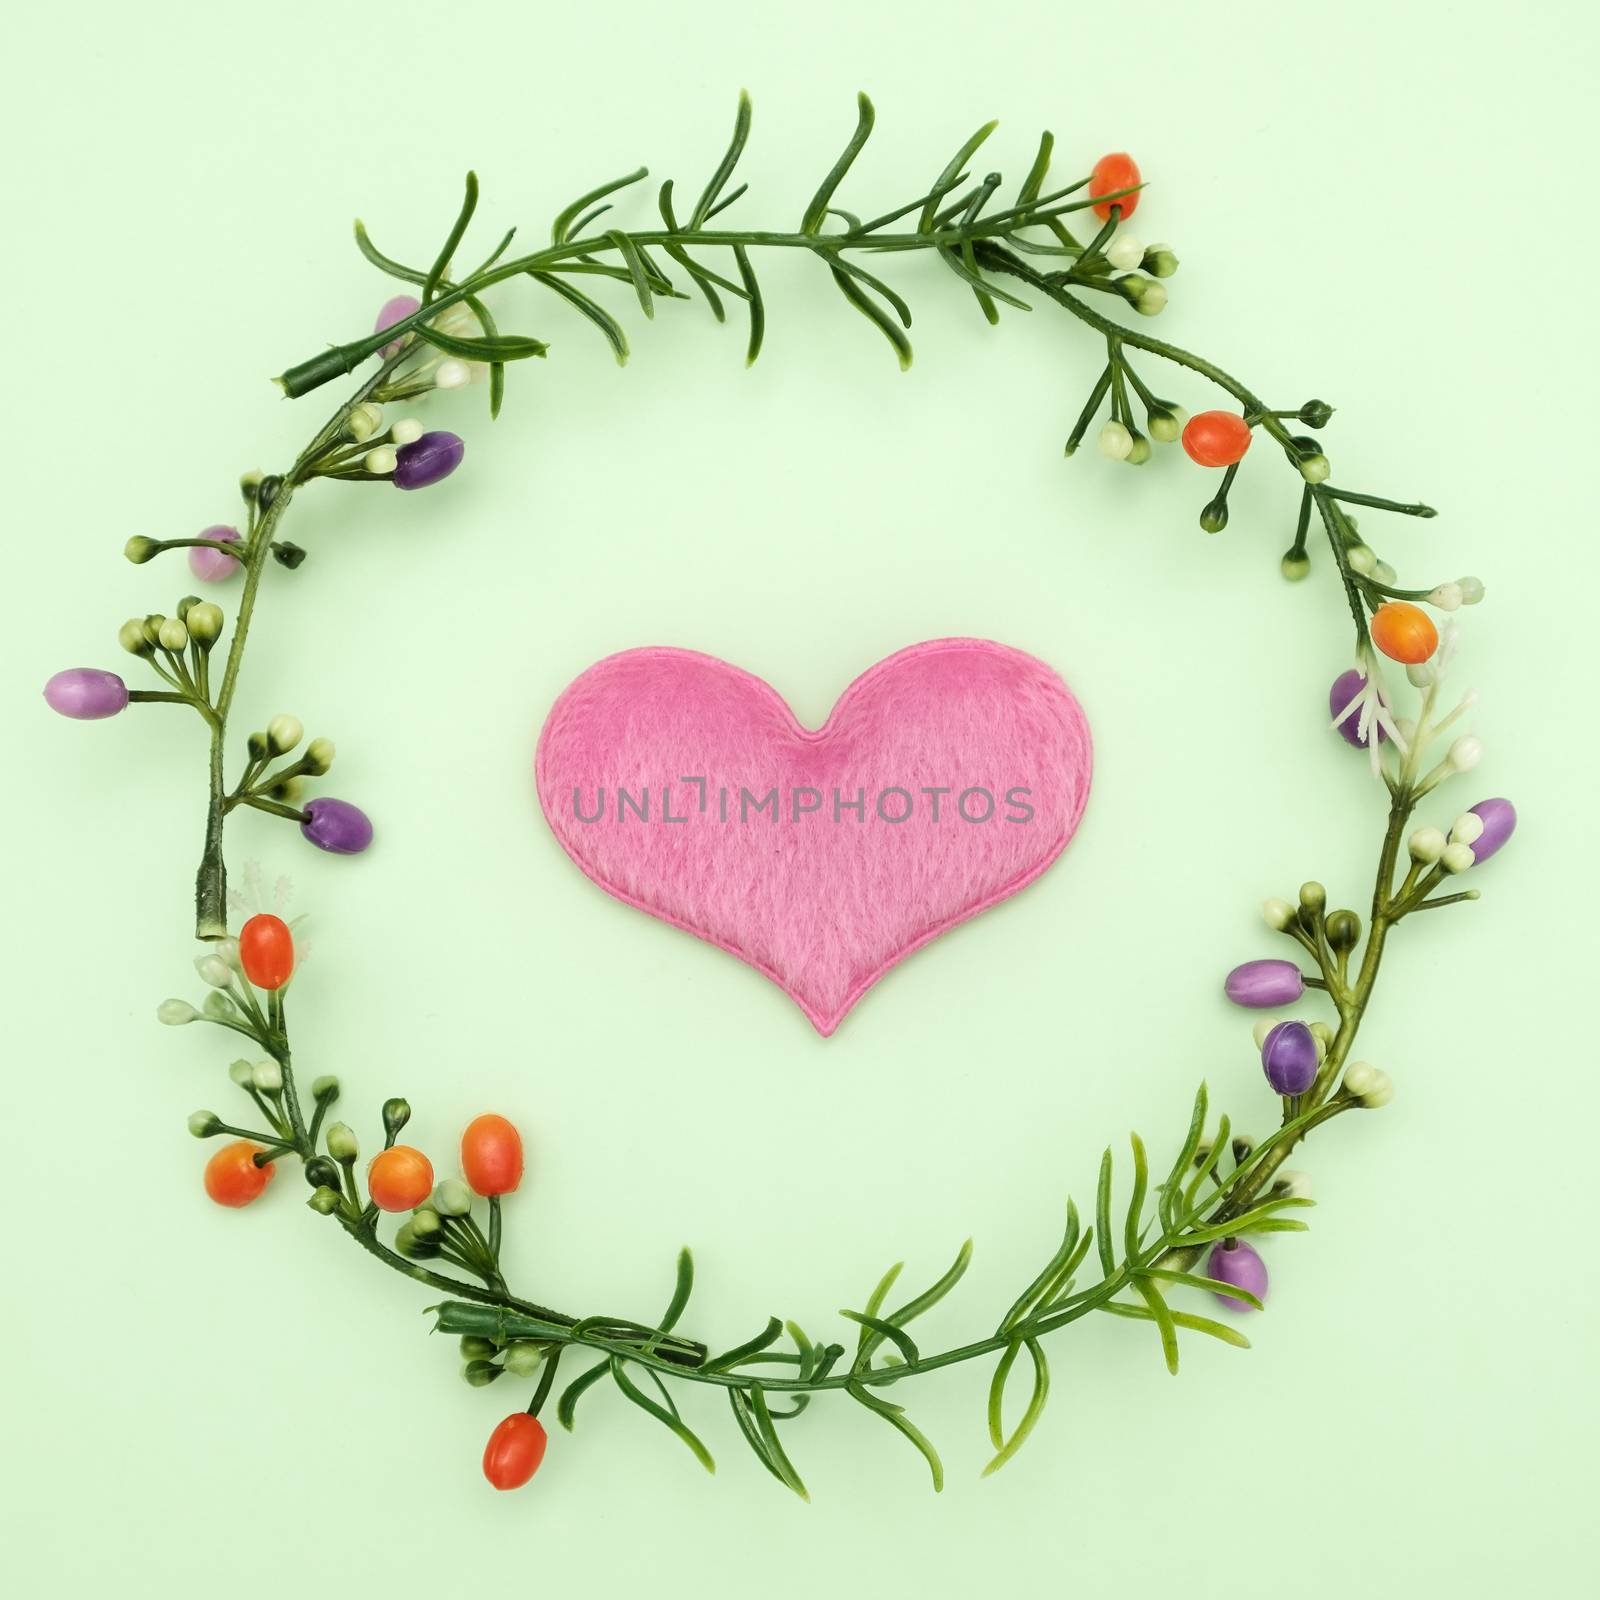 Flowers surrounded the Heart on green background, valentine concept.